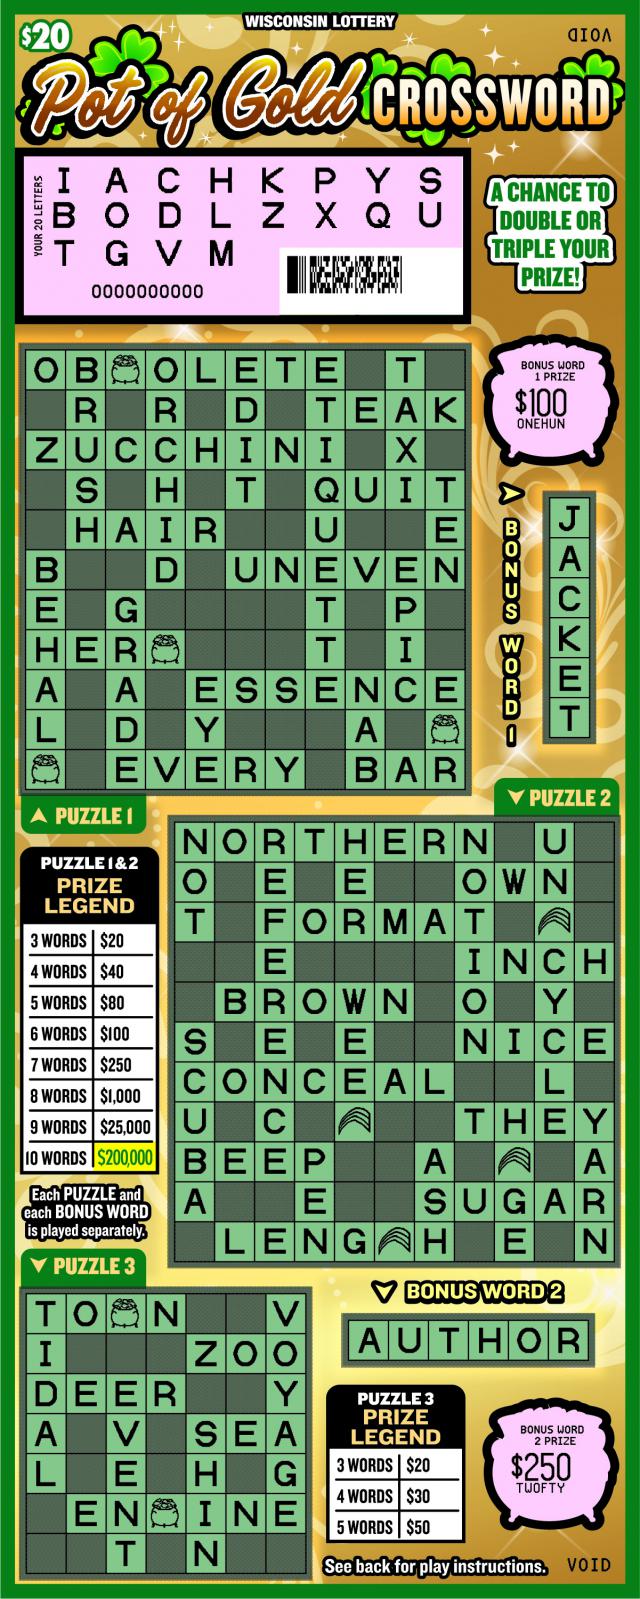 Pot of Crossword instant scratch ticket from Wisconsin Lottery - scratched